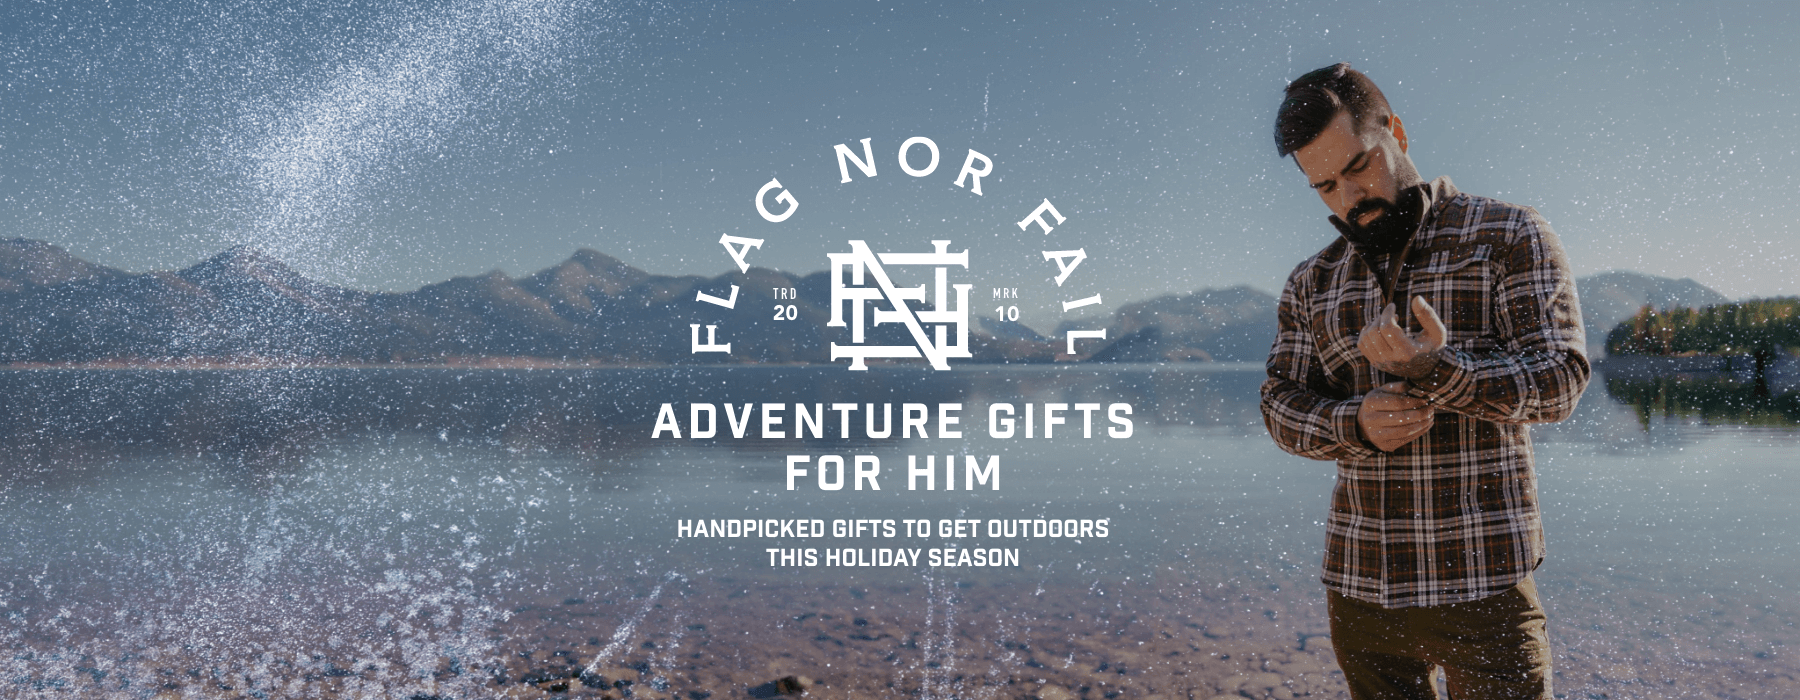 ADVENTURE GIFT GUIDE FOR HIM